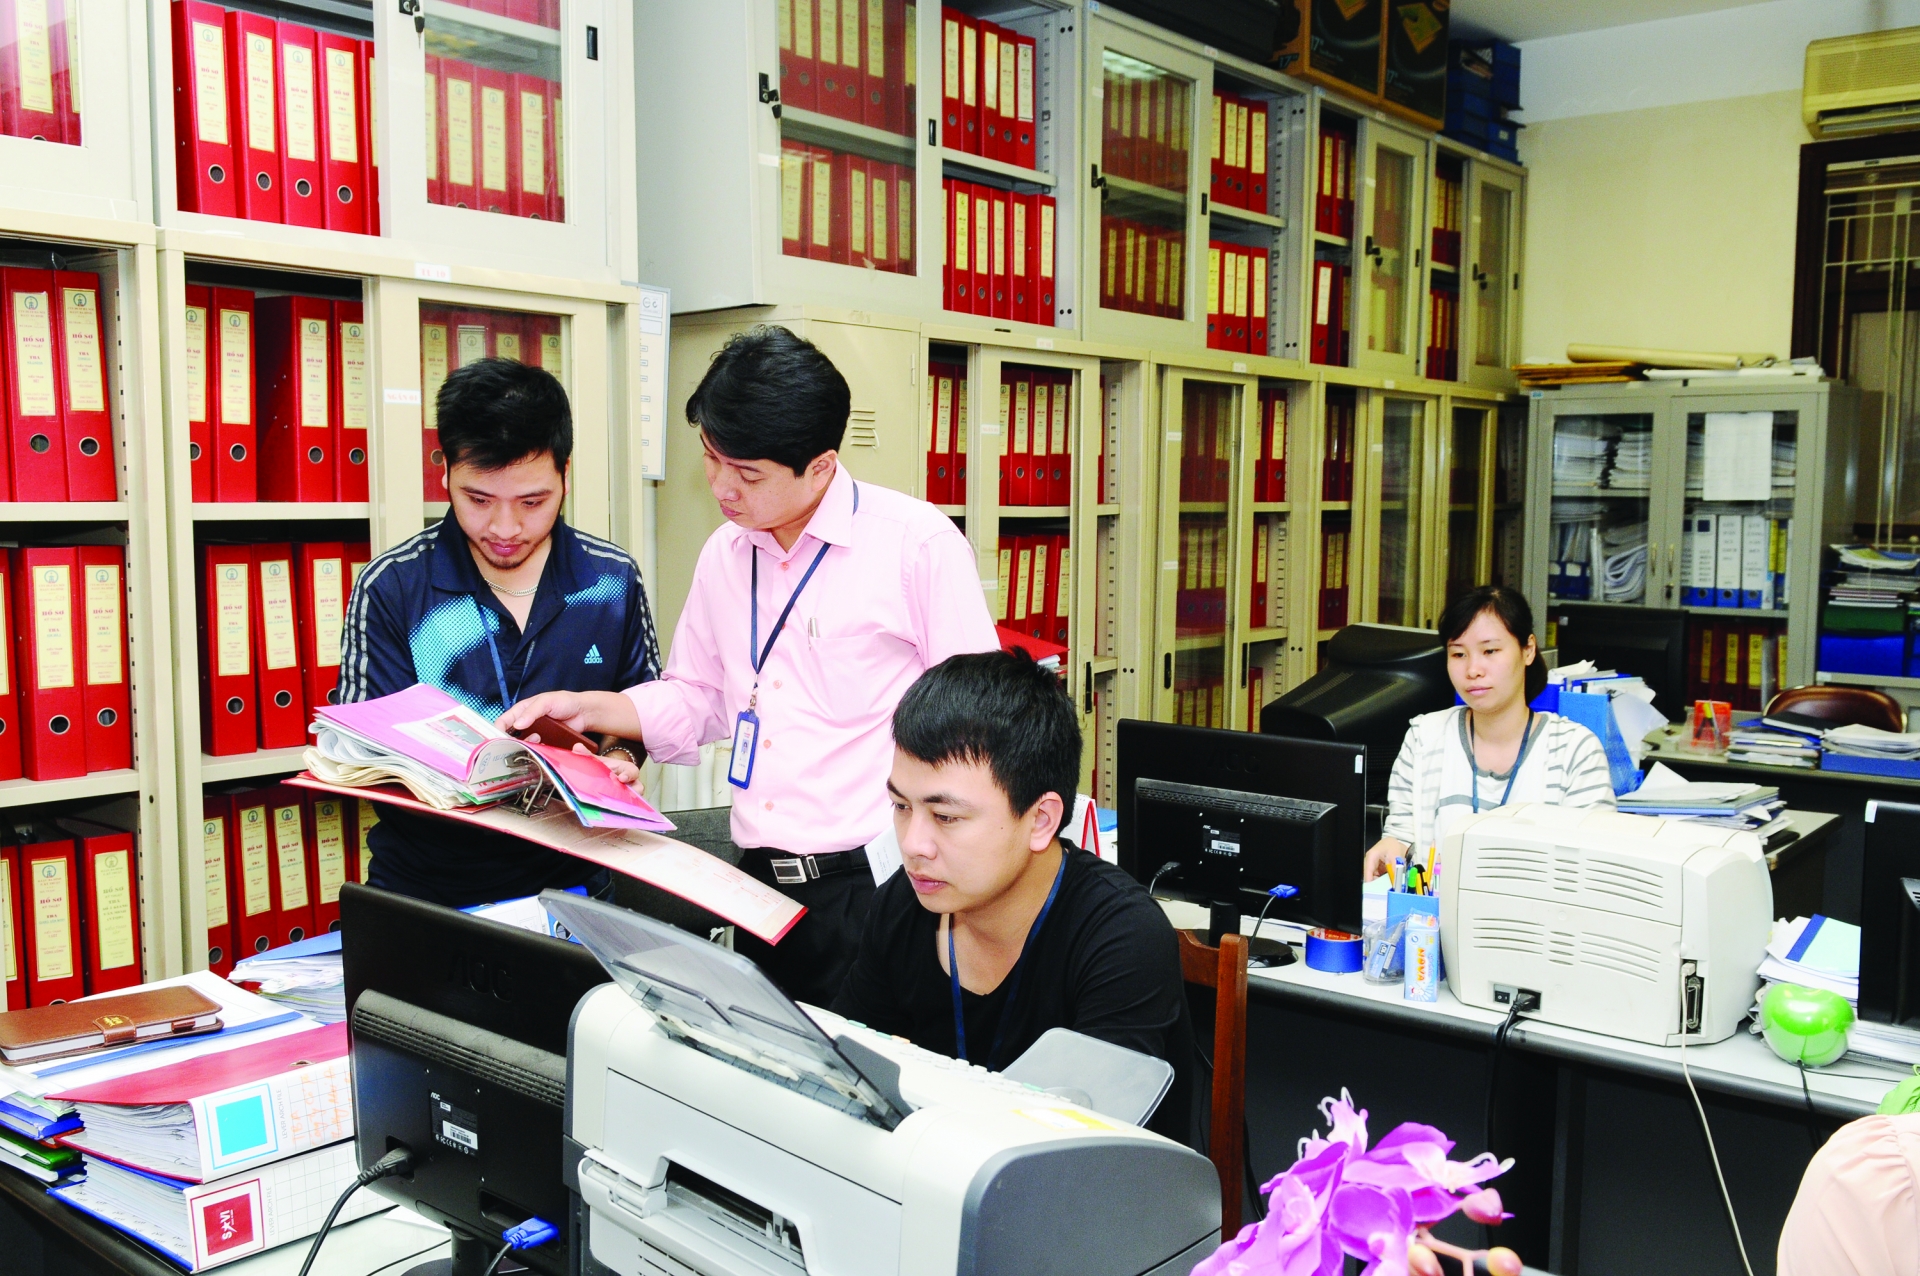 Hanoi aims to become digital information leader